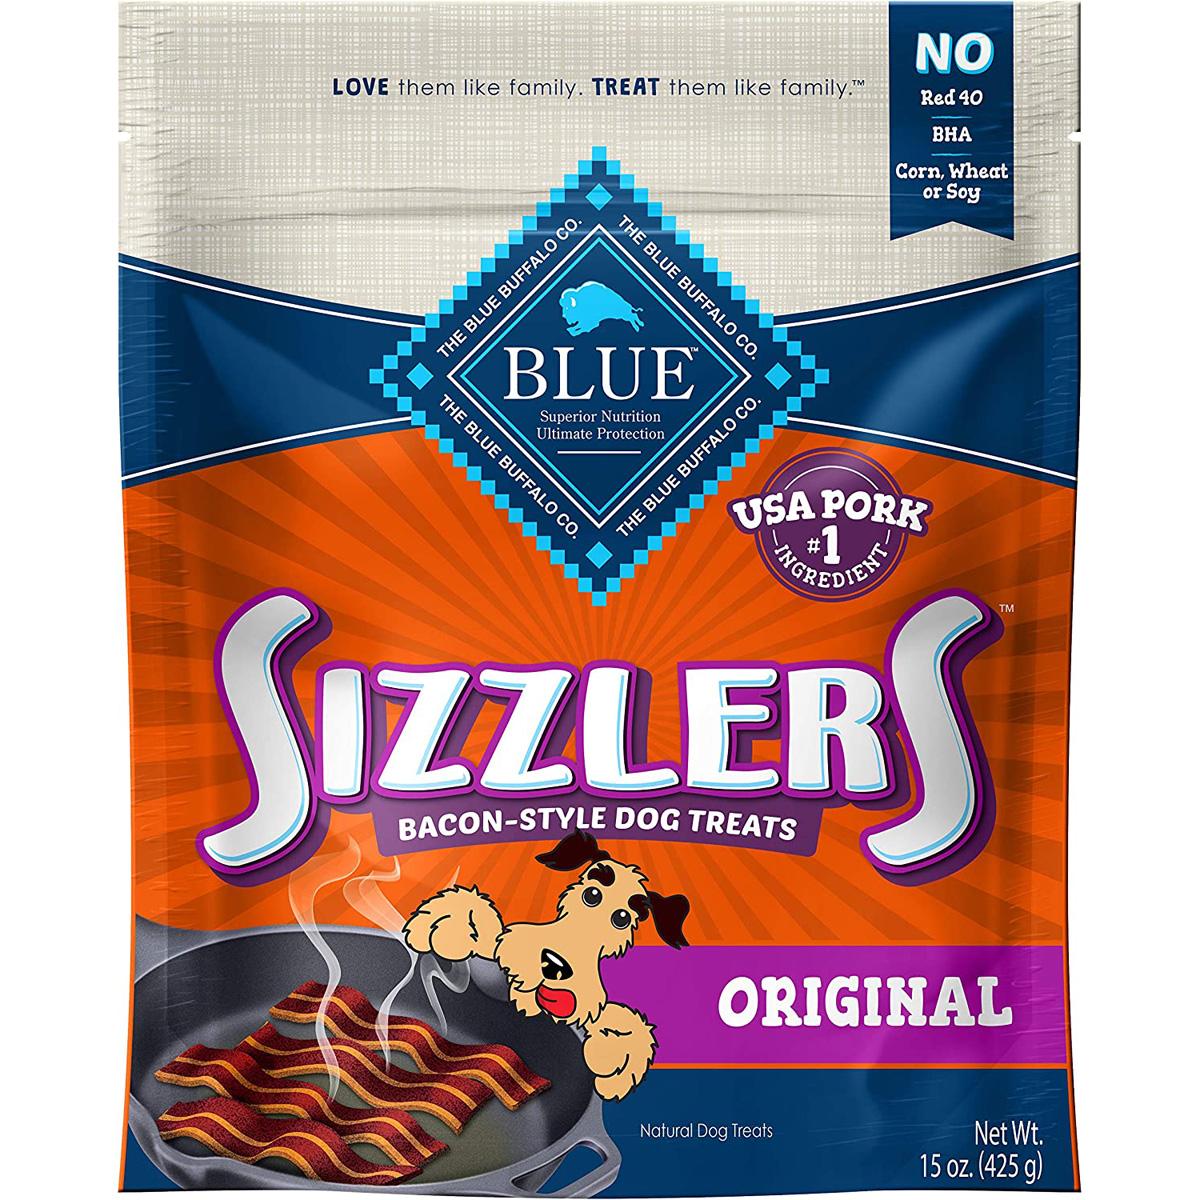 Blue Buffalo Sizzlers Natural Bacon-Style Soft-Moist Dog Treats for $5.49 Shipped